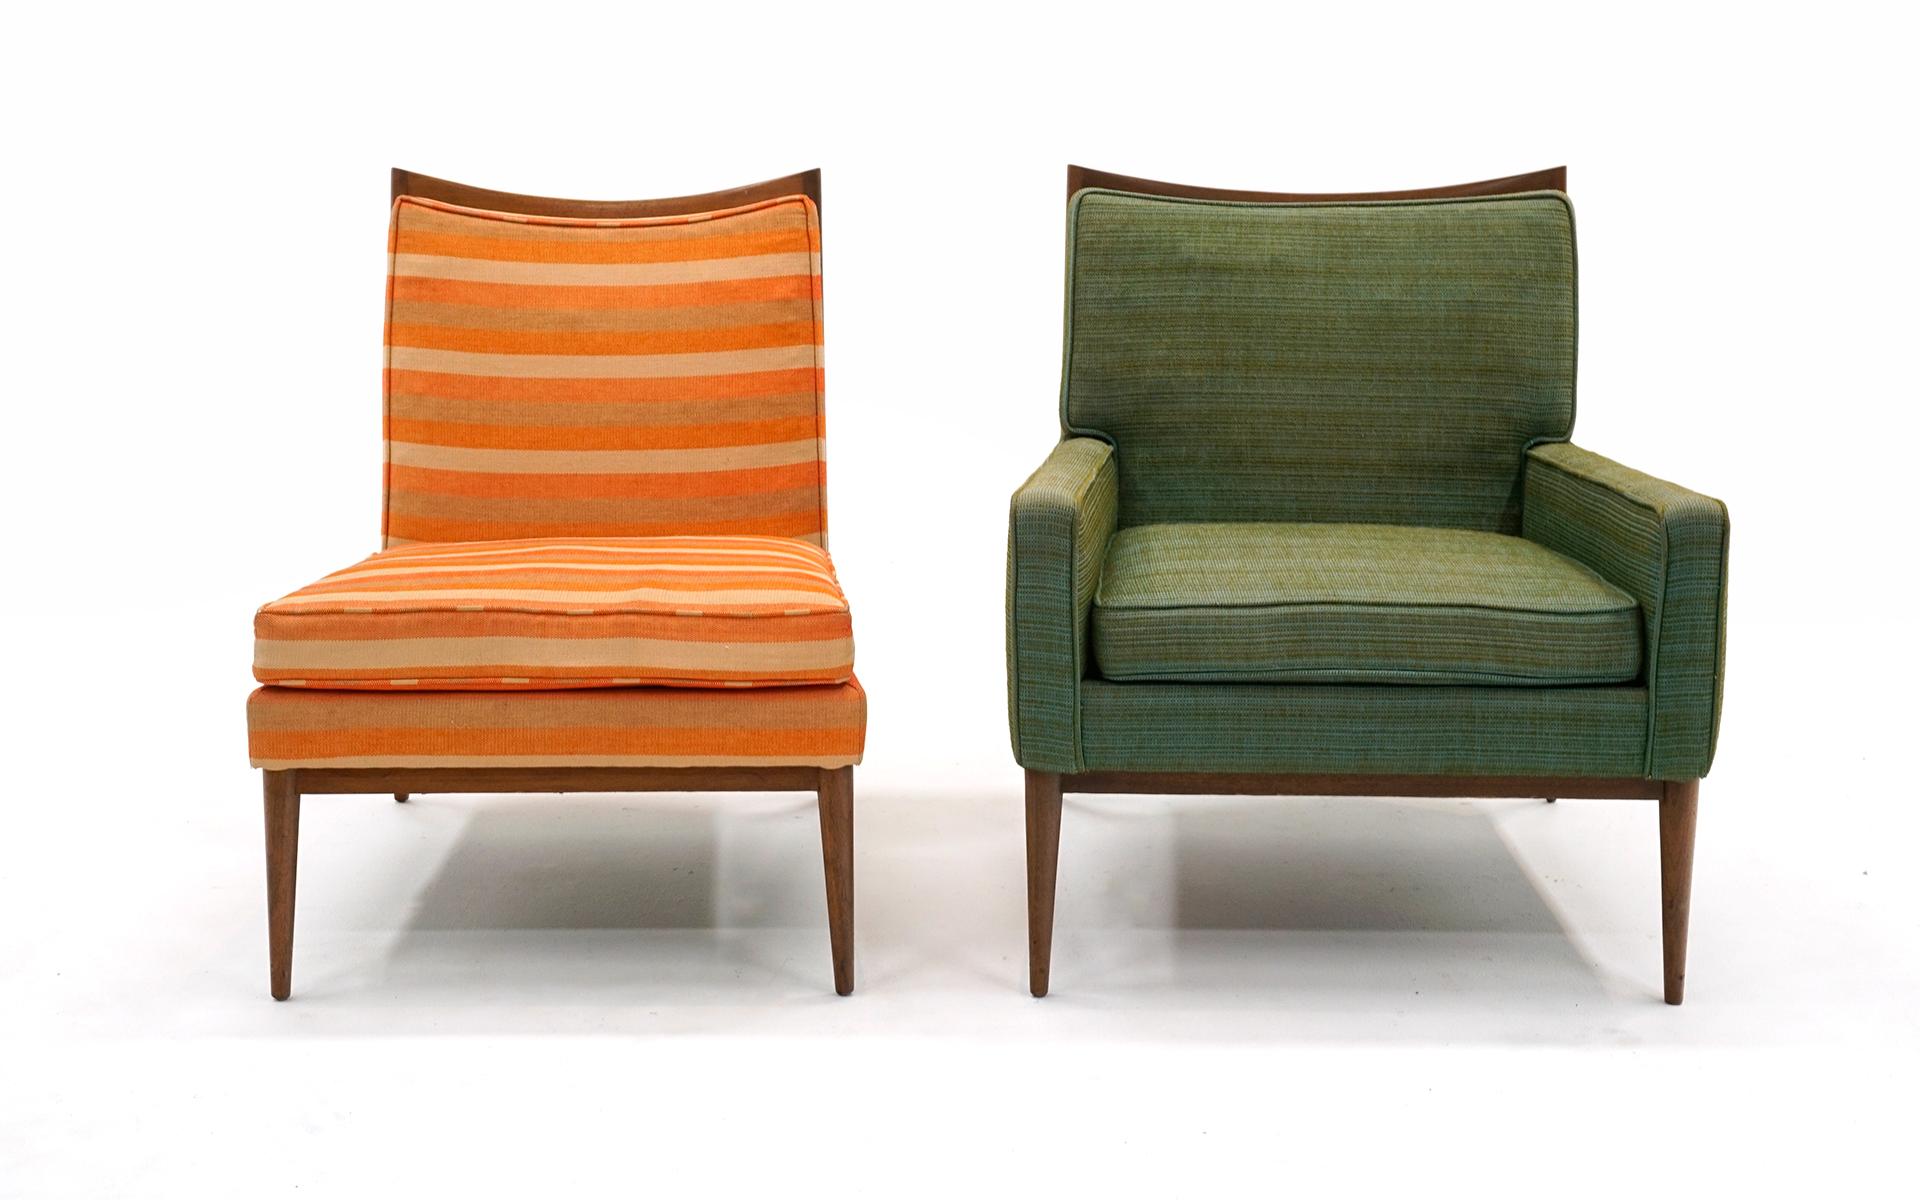 Paul McCobb Lounge Chairs models 1320, the armless version and 1322, the version with arms.  Price is for each.  Signed with the Custom Craft label.  Both have walnut frames in great structural condition while retaining their original fabric.  The